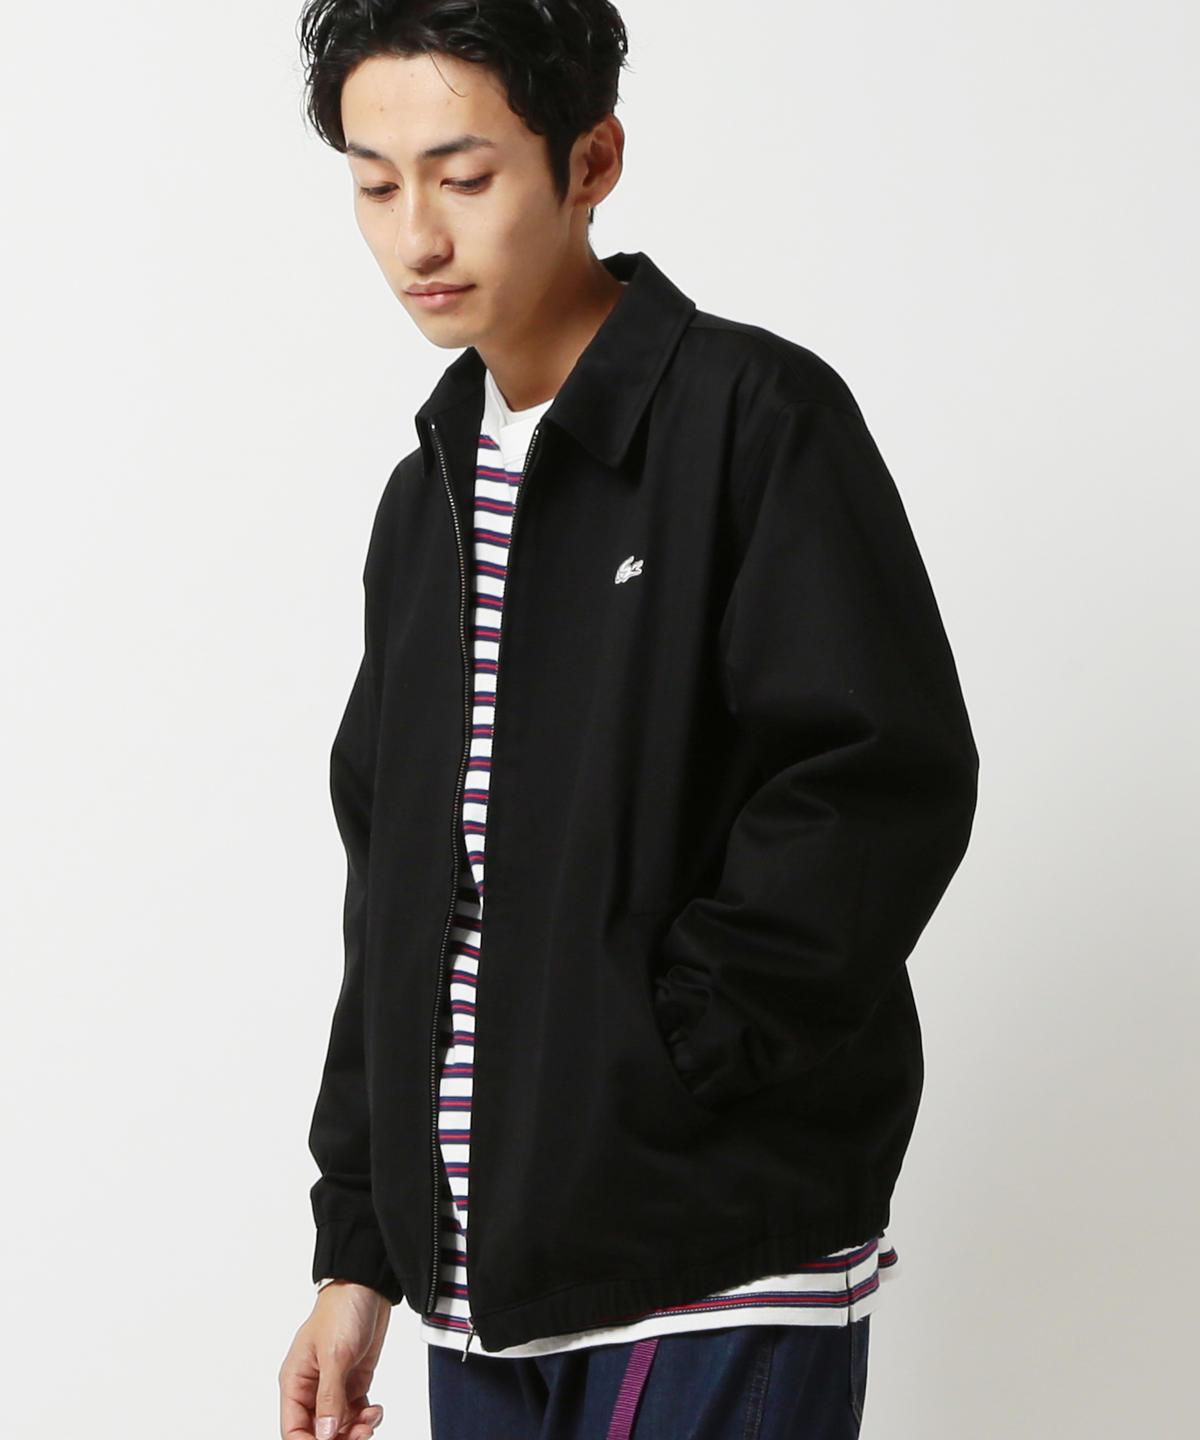 BEAMS teams up with Lacoste for a small capsule collection — eye_C